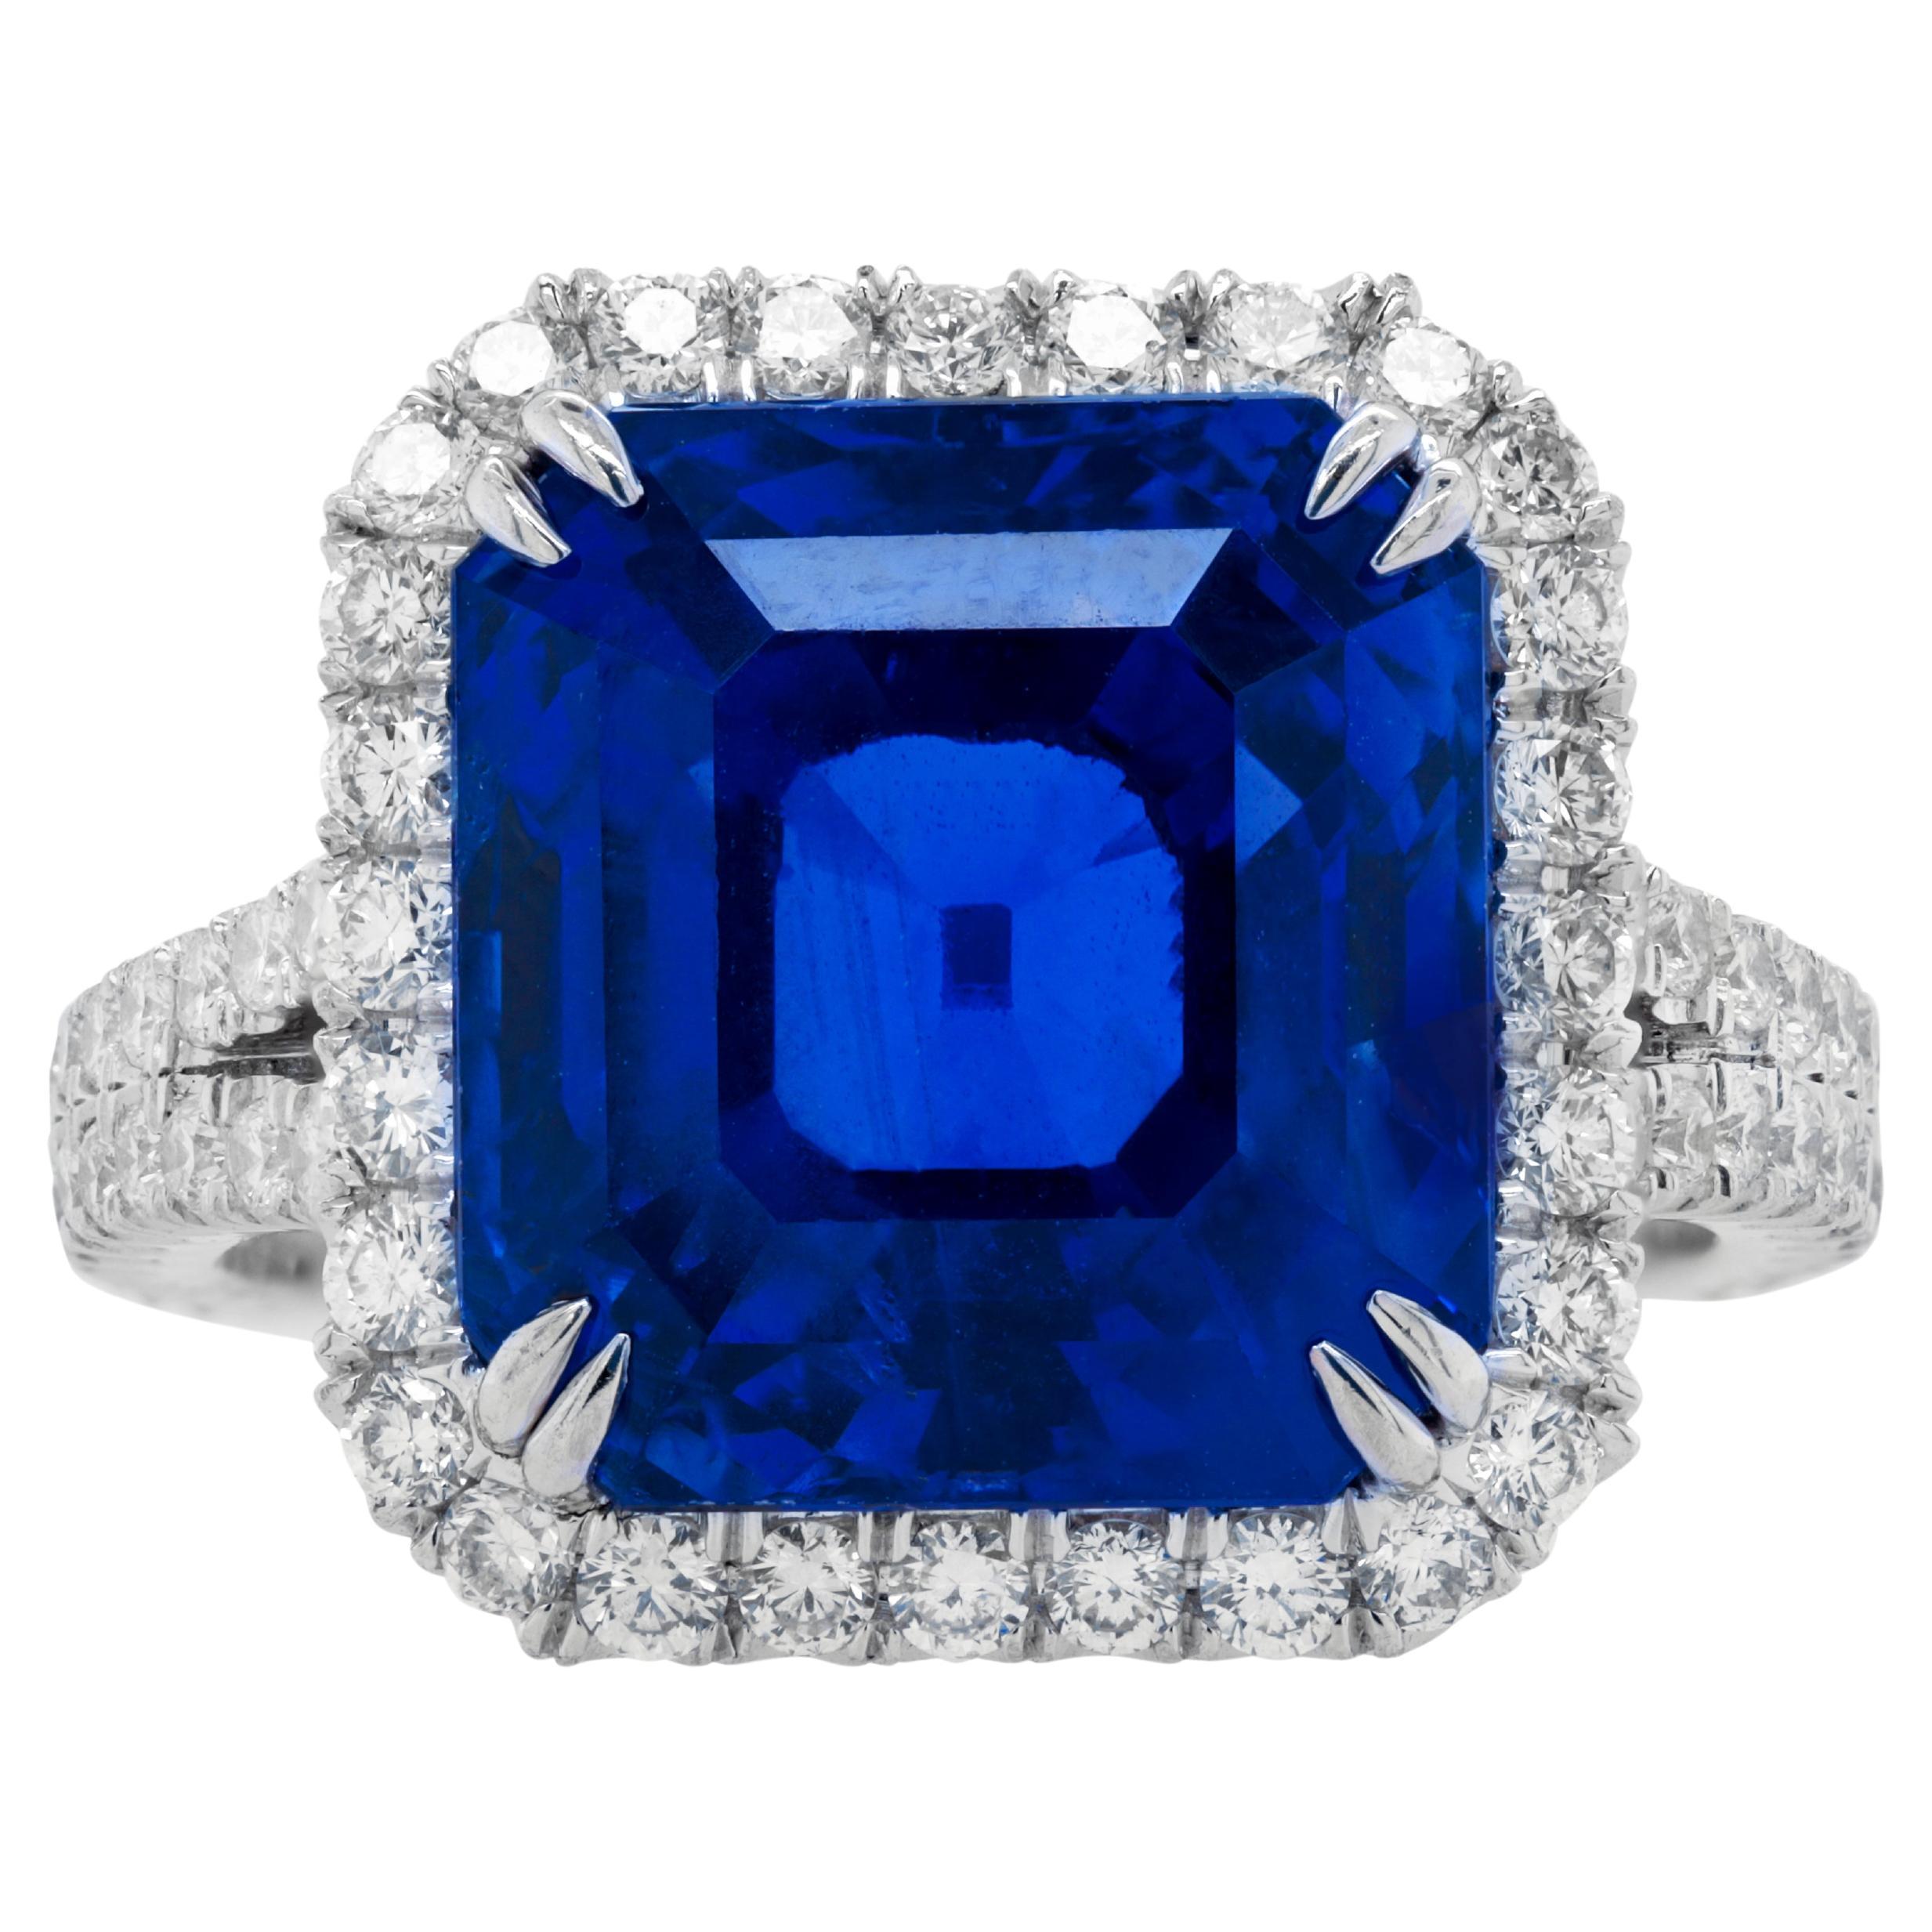 Diana M.Platinum sapphire and diamond ring featuring a 13.42 ct Gublin certified